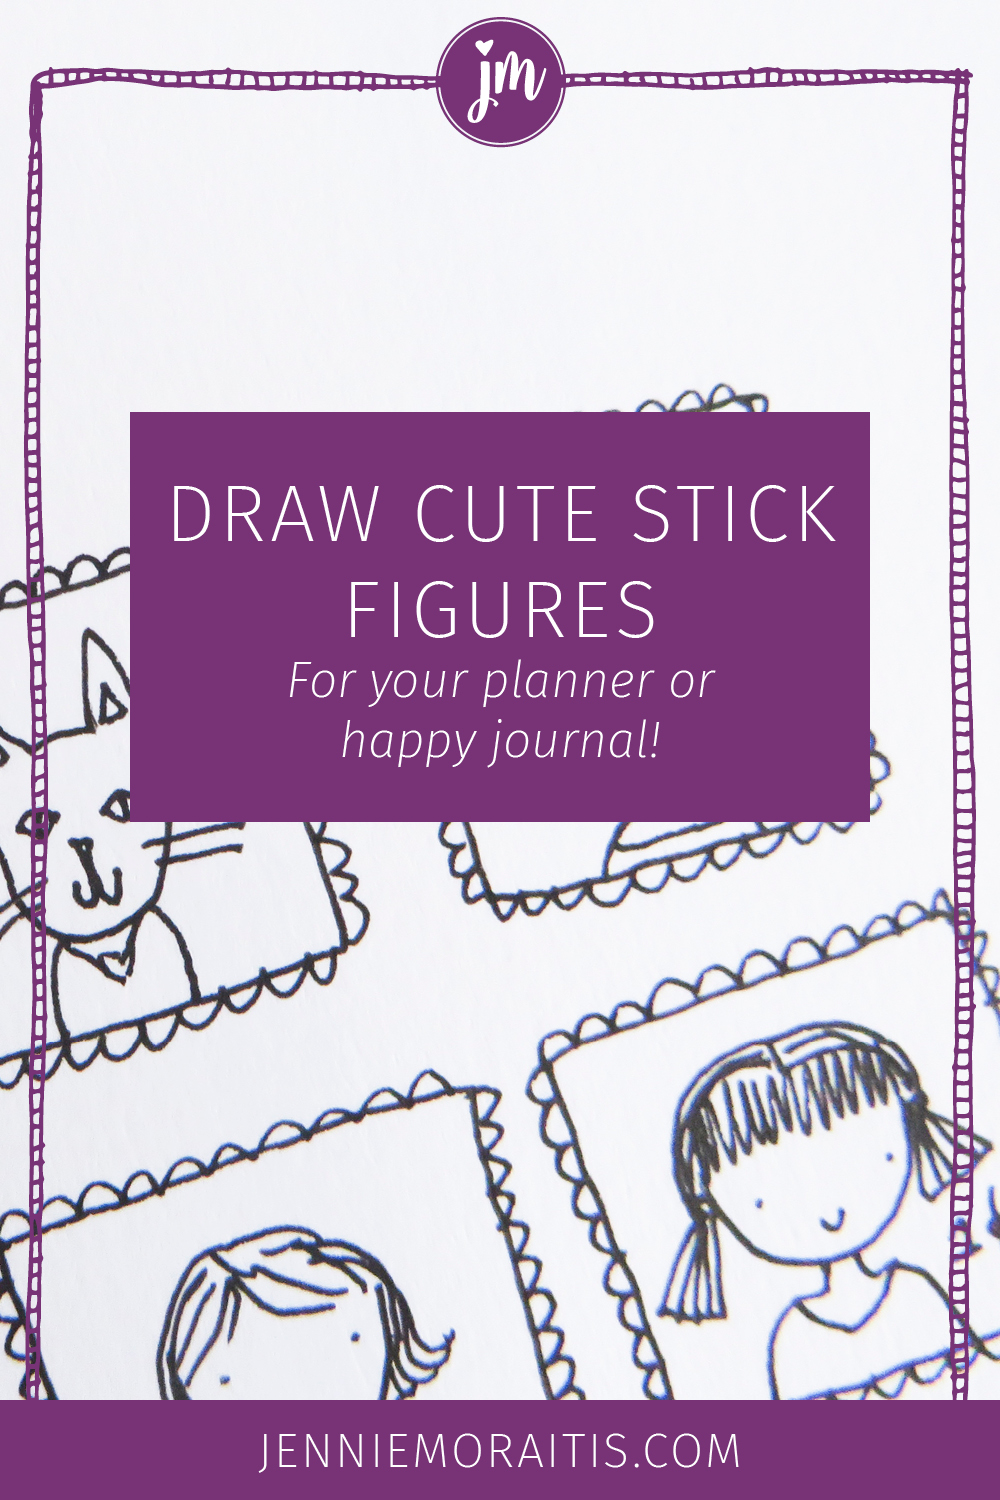 How to Draw Cute Stick Figures